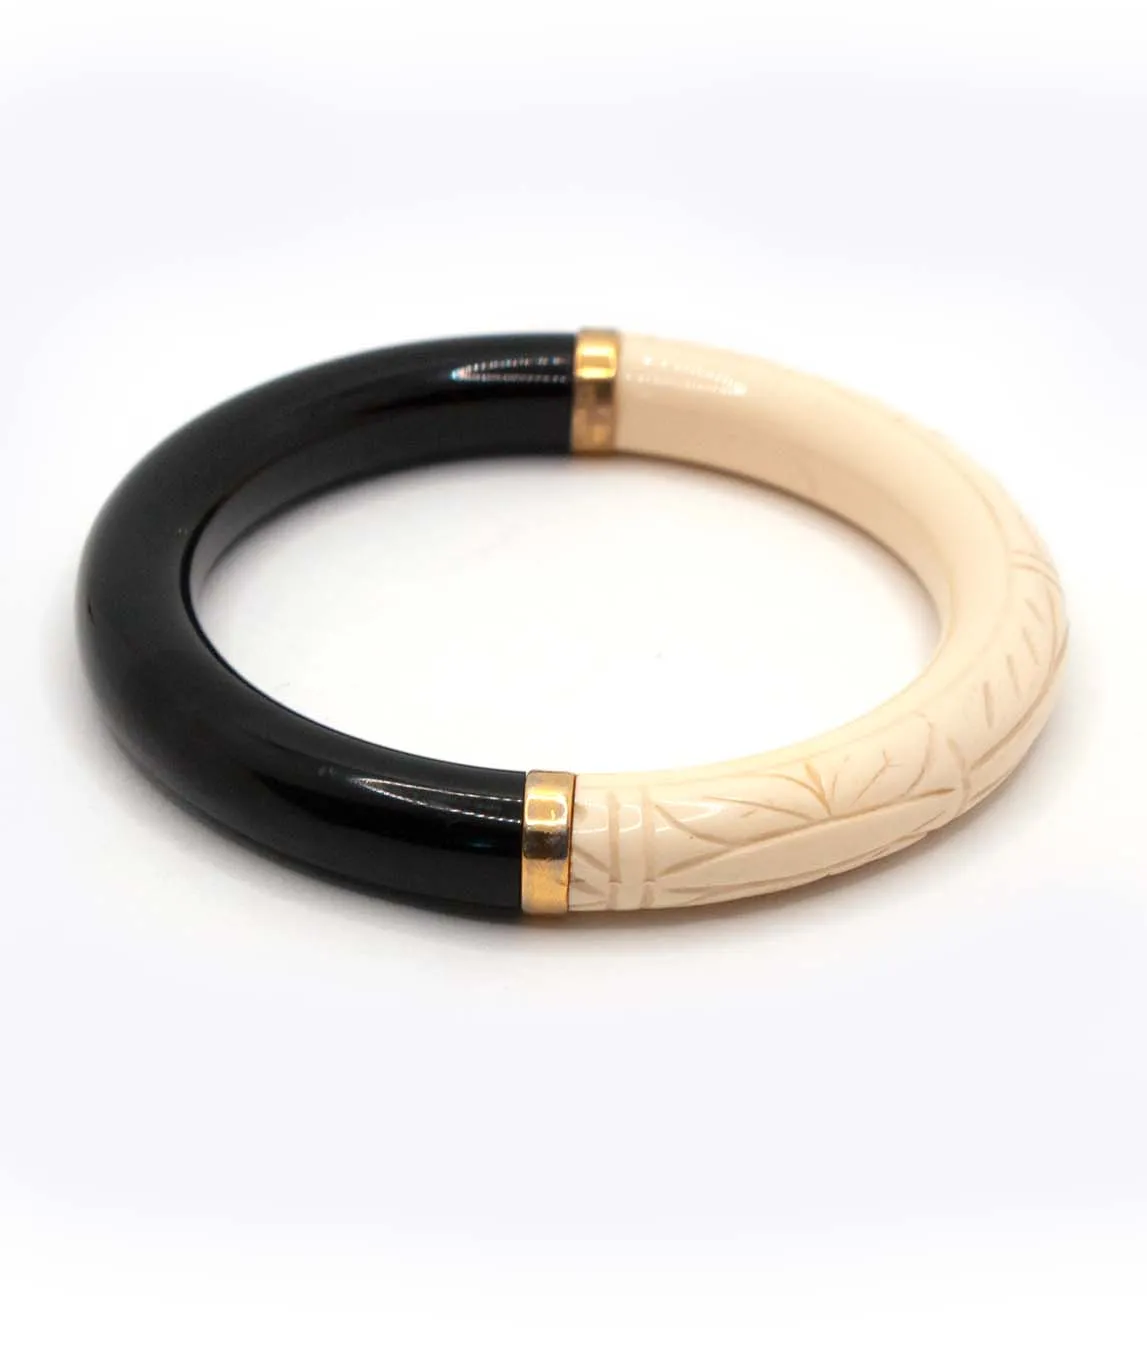 Sideview of black and ivory Givenchy bangle